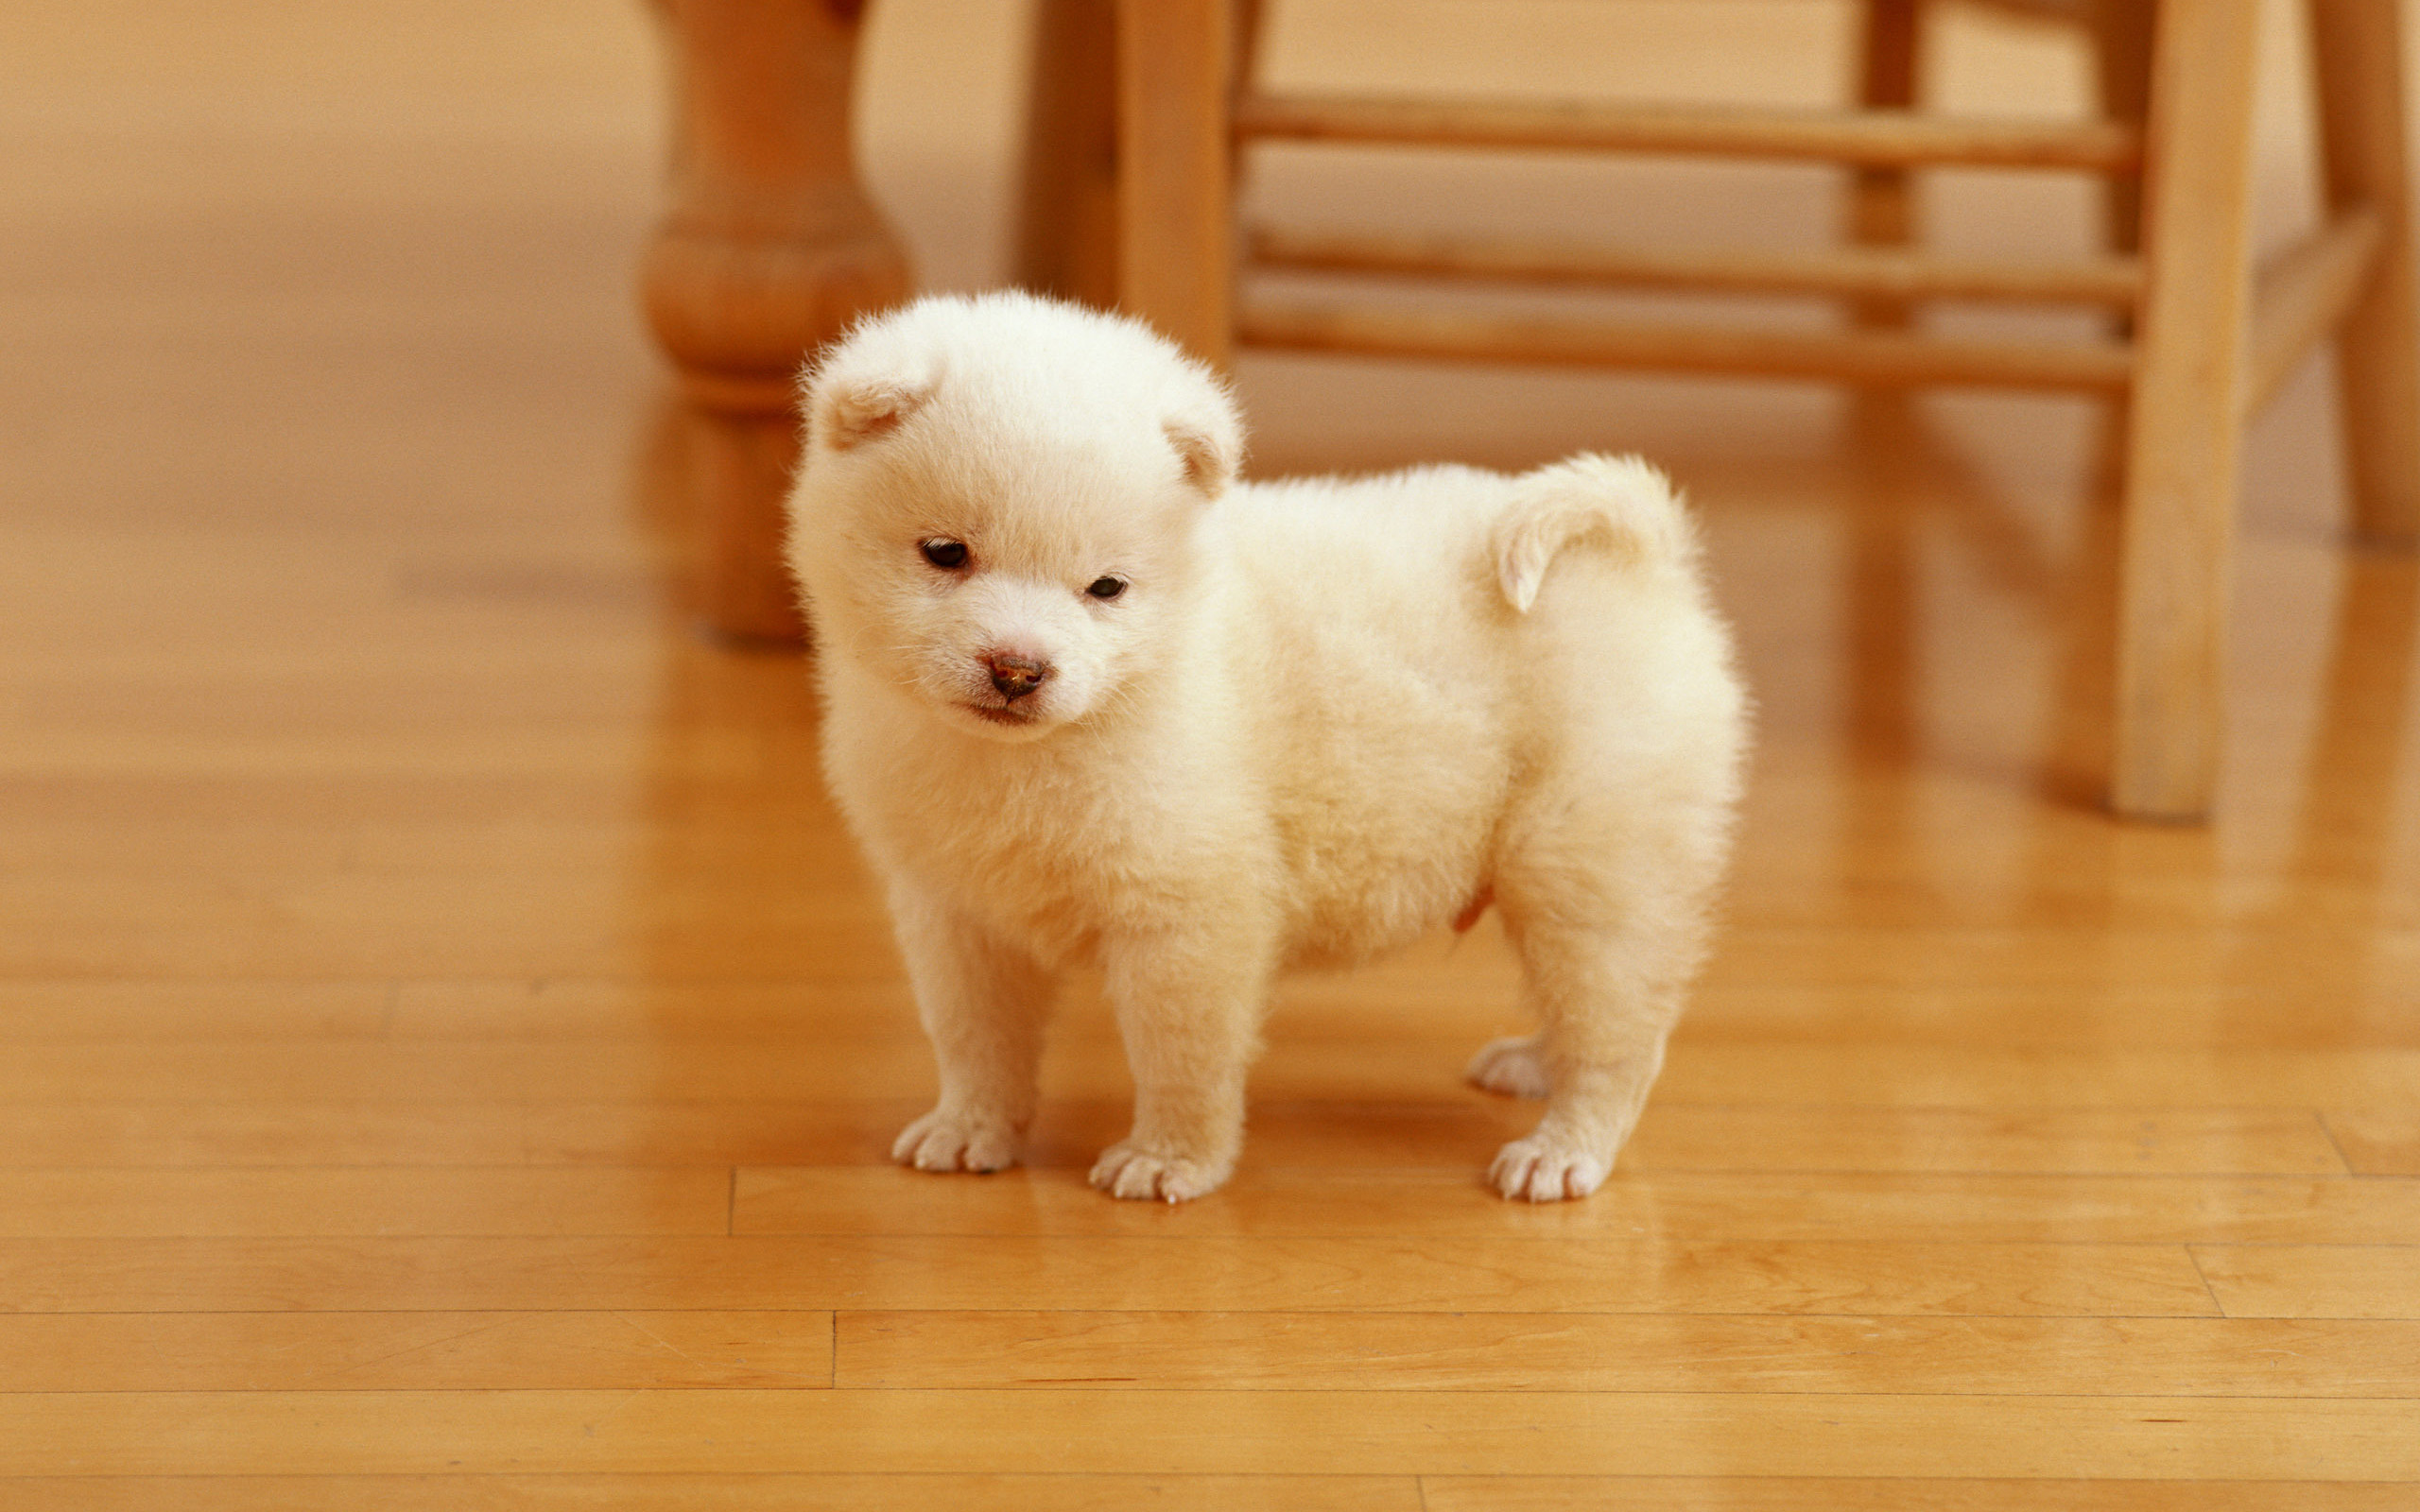 2560x1600 Sweet Cutest Puppy Wallpapers | Hd Wallpapers And Also Cute Puppy Wallpaper